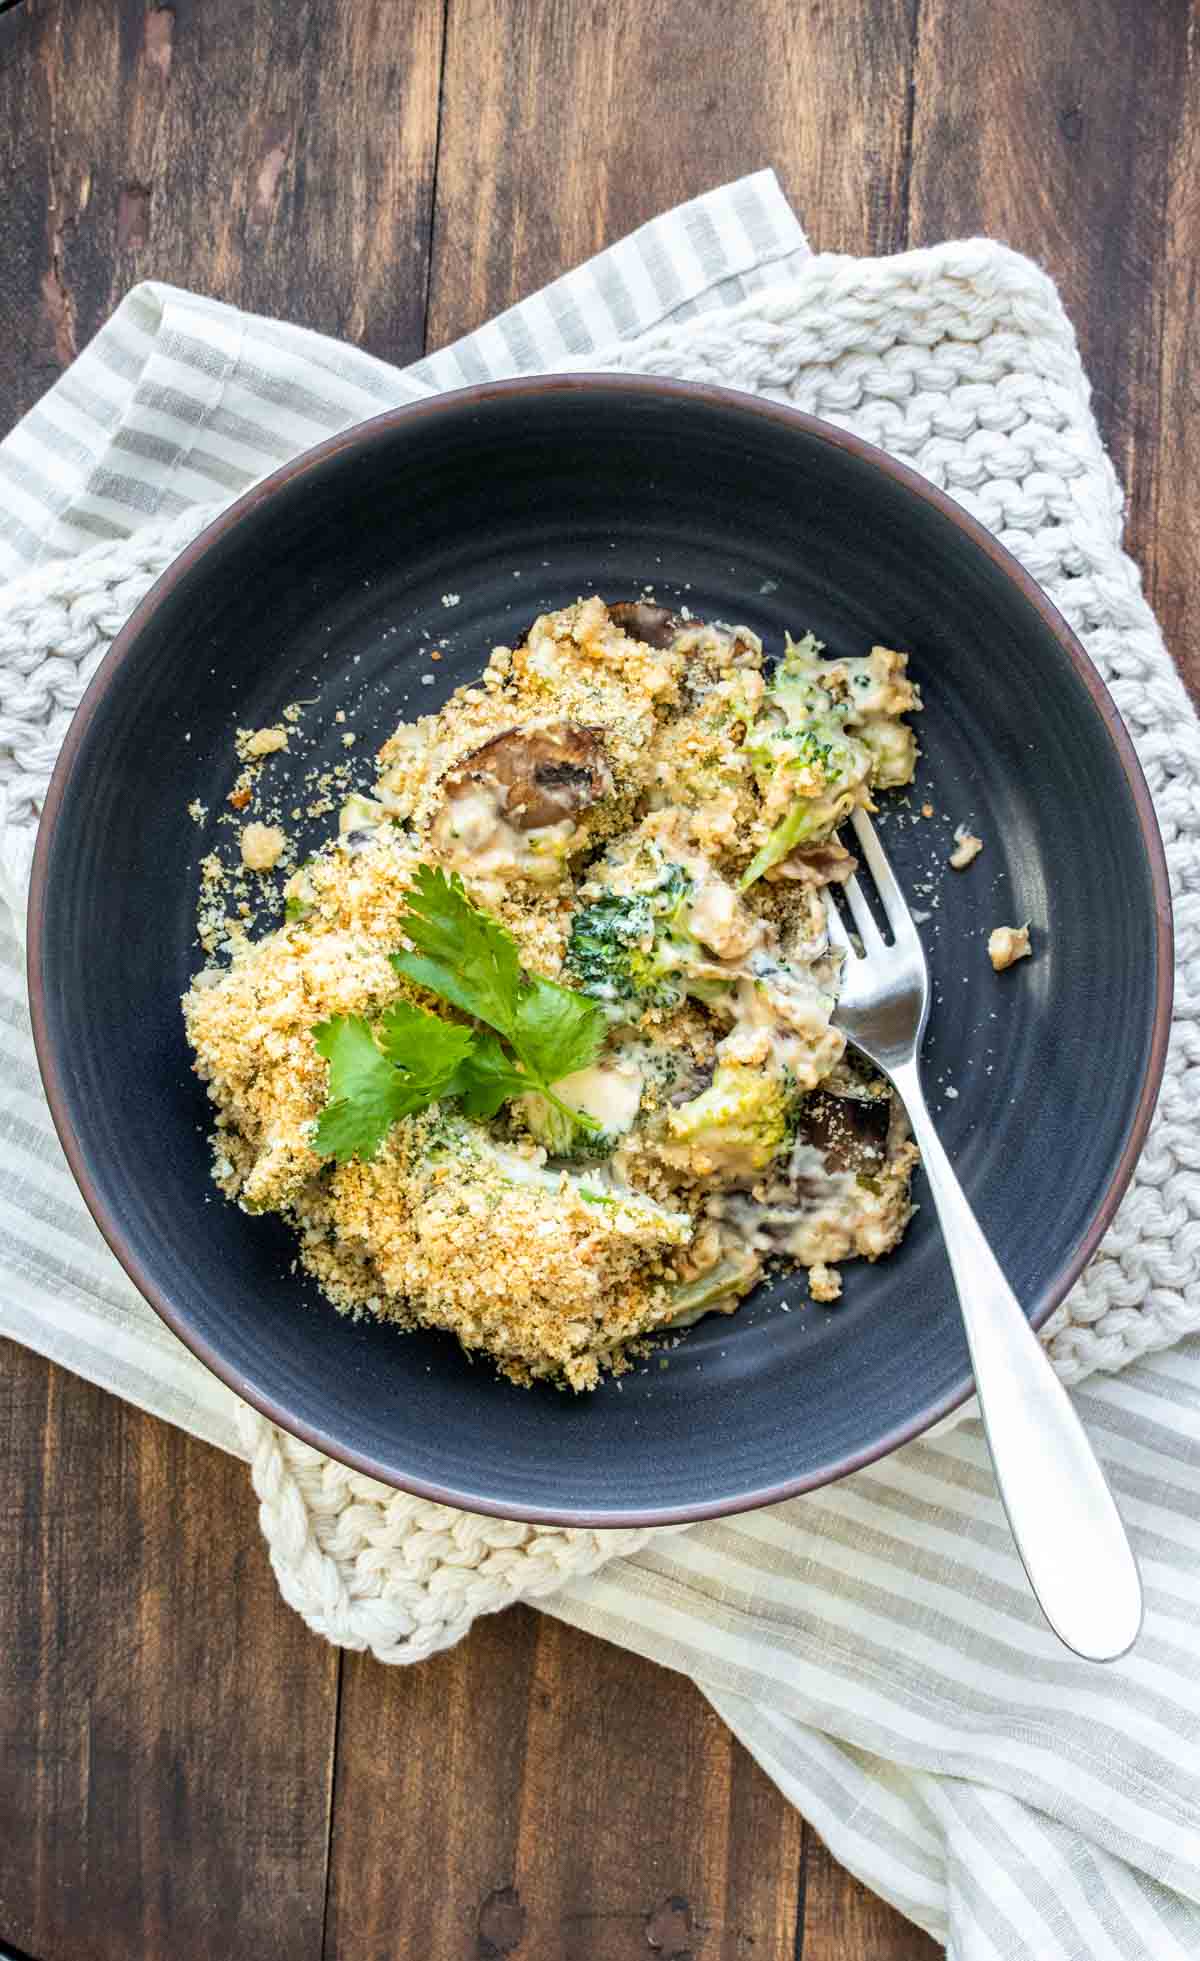 Creamy broccoli casserole in a blue dish with a fork in it